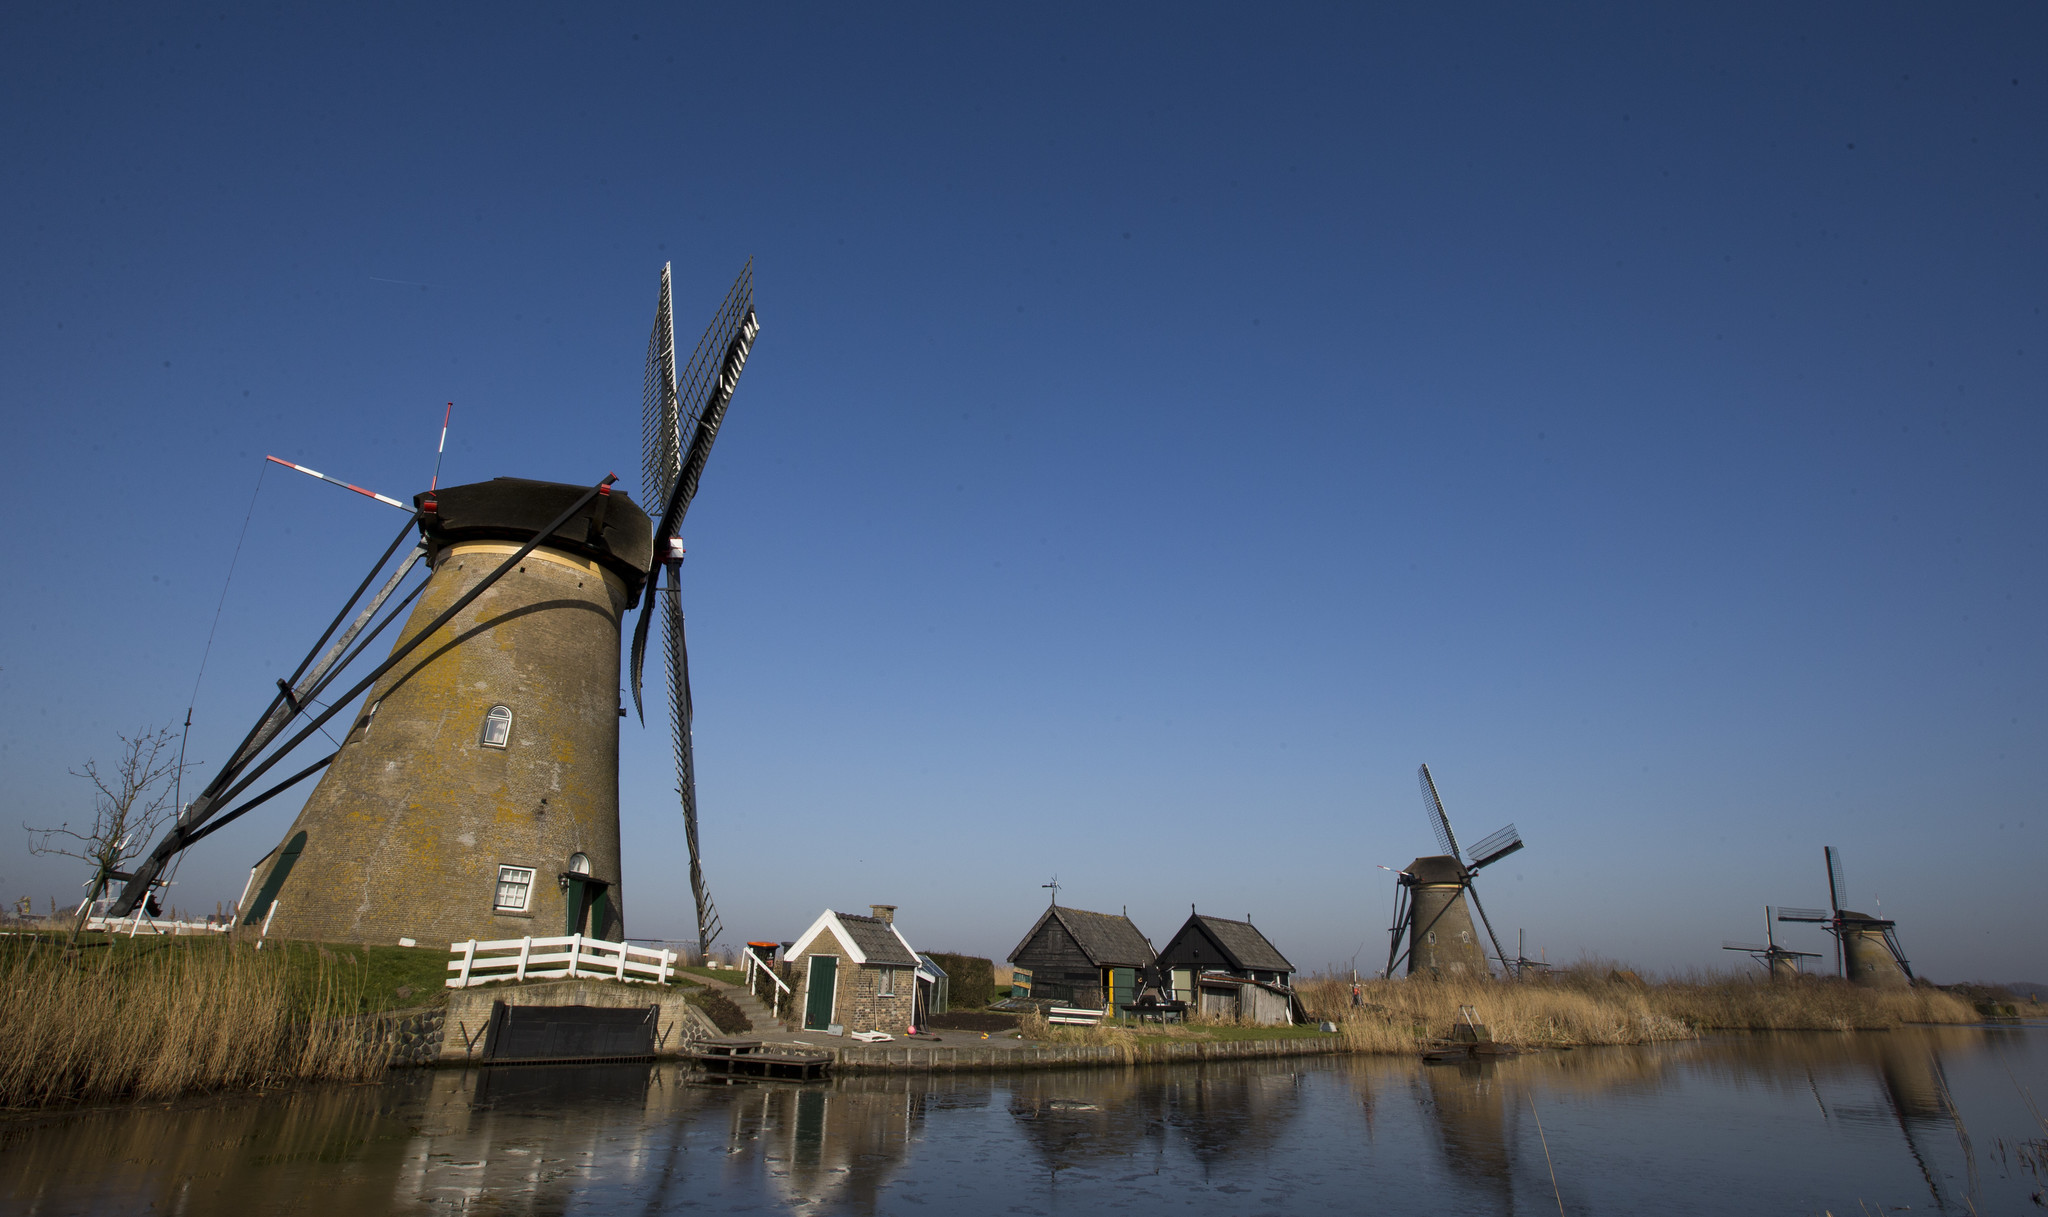 Kinderdijk windmills a must-see on any trip to Holland - Chicago Tribune